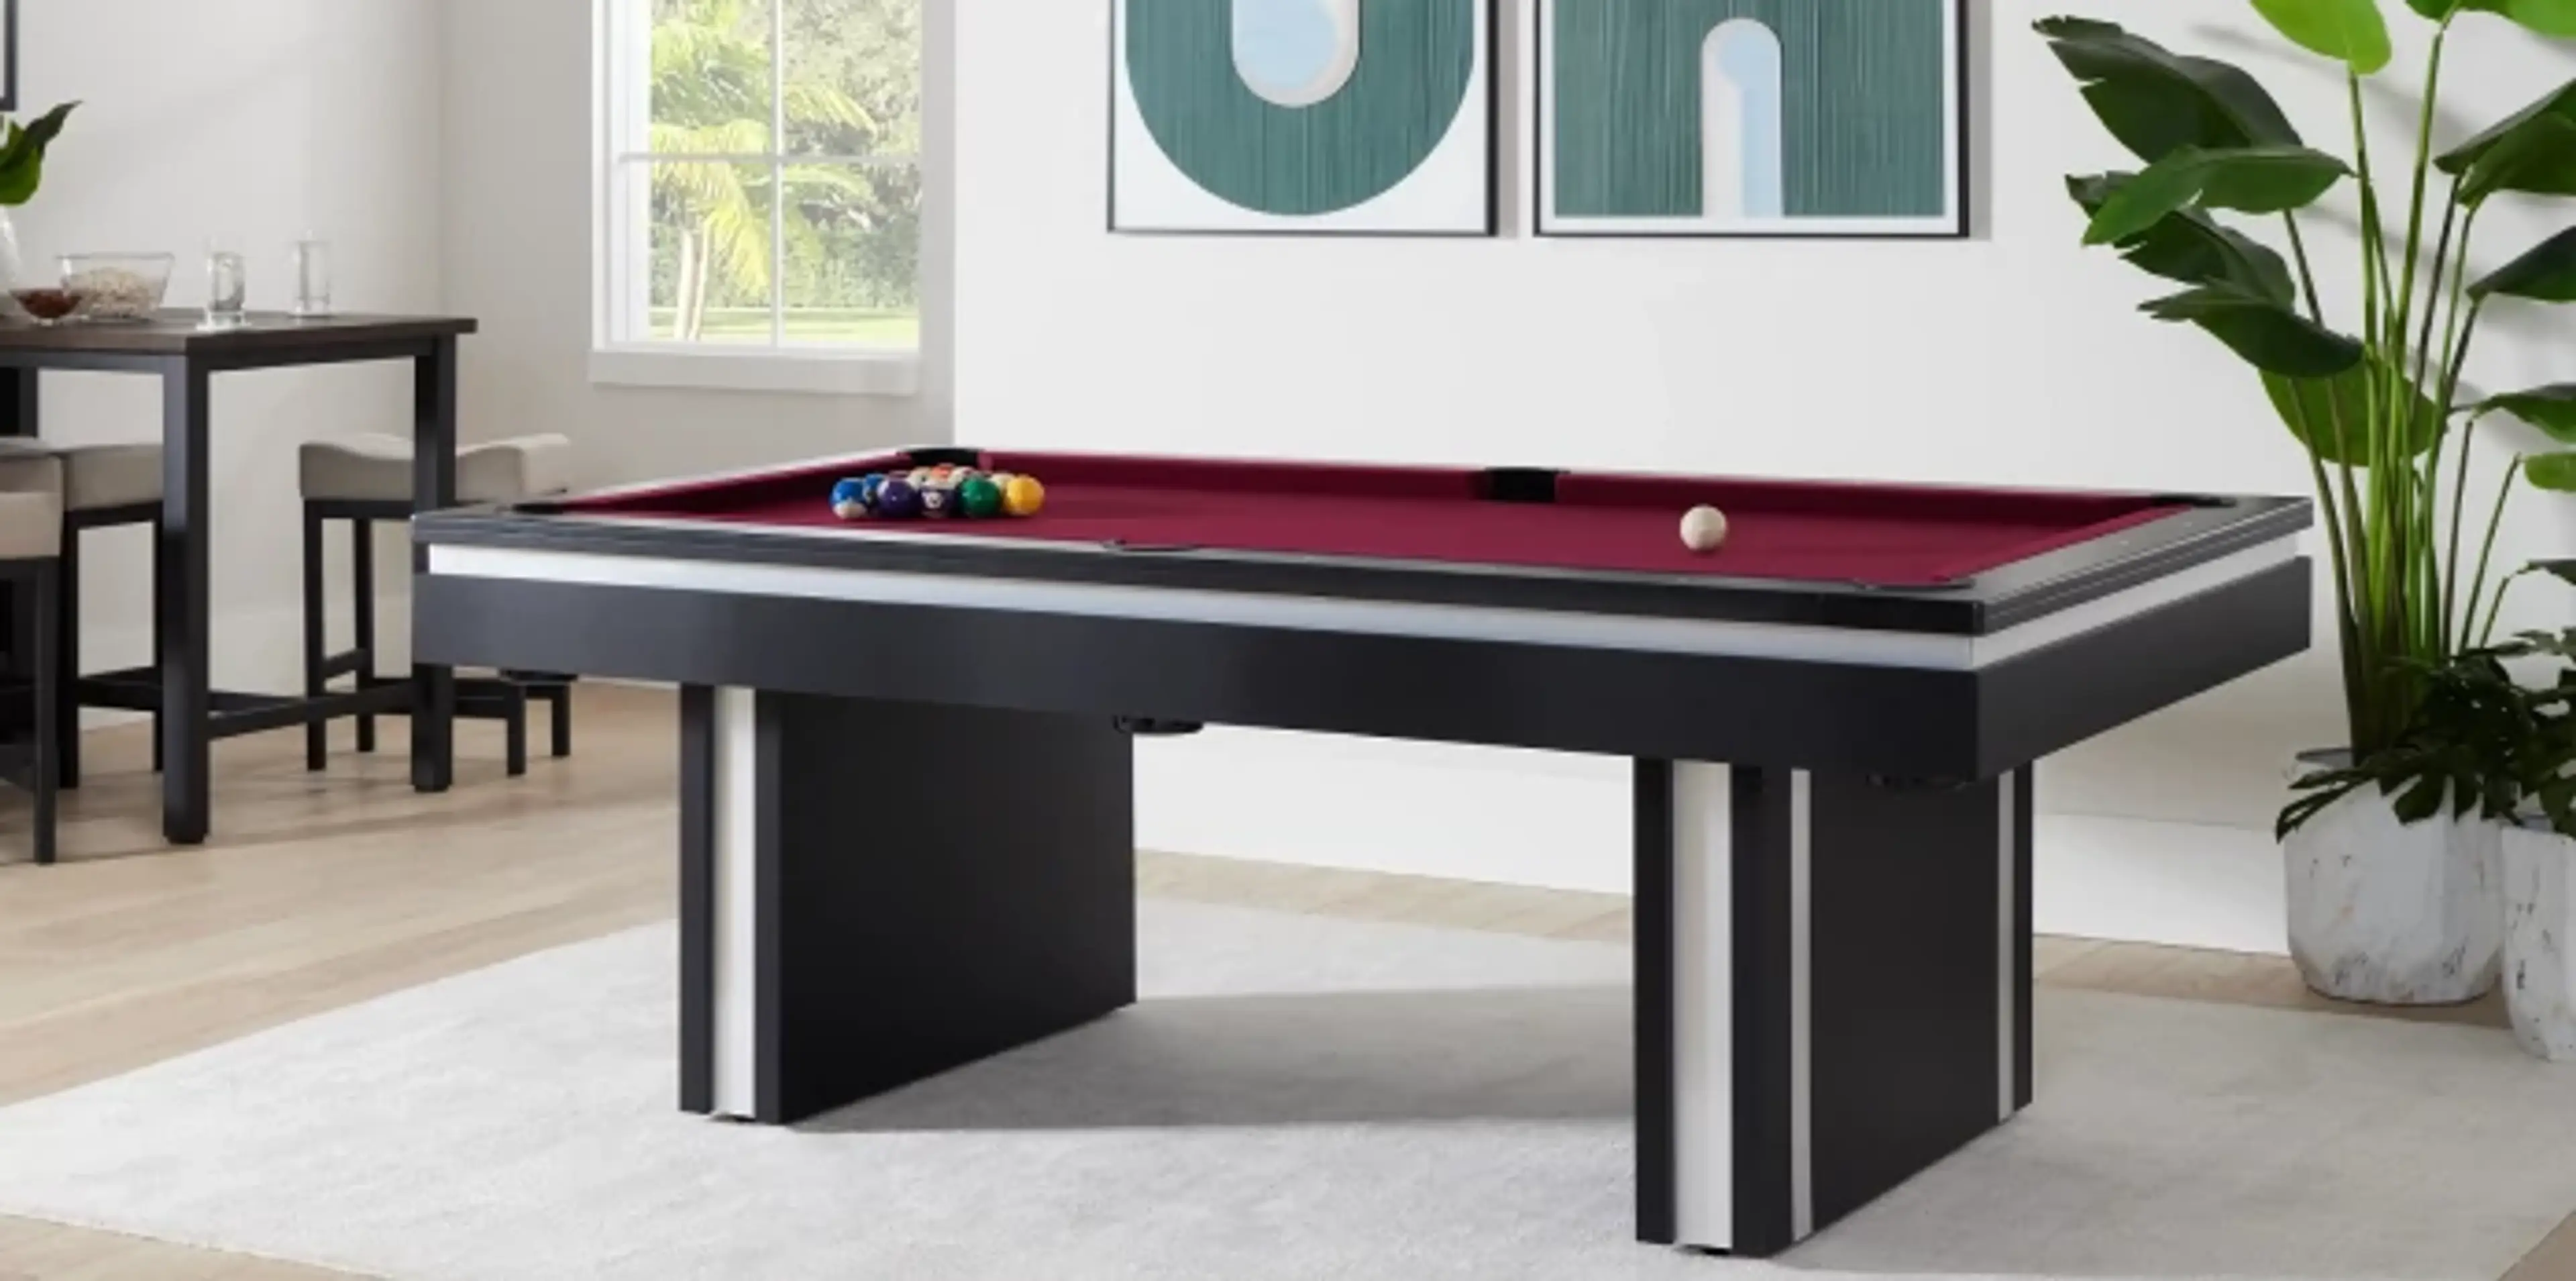 Level Up Your Game Room: Styling Tips for Ultimate Fun and Functionality